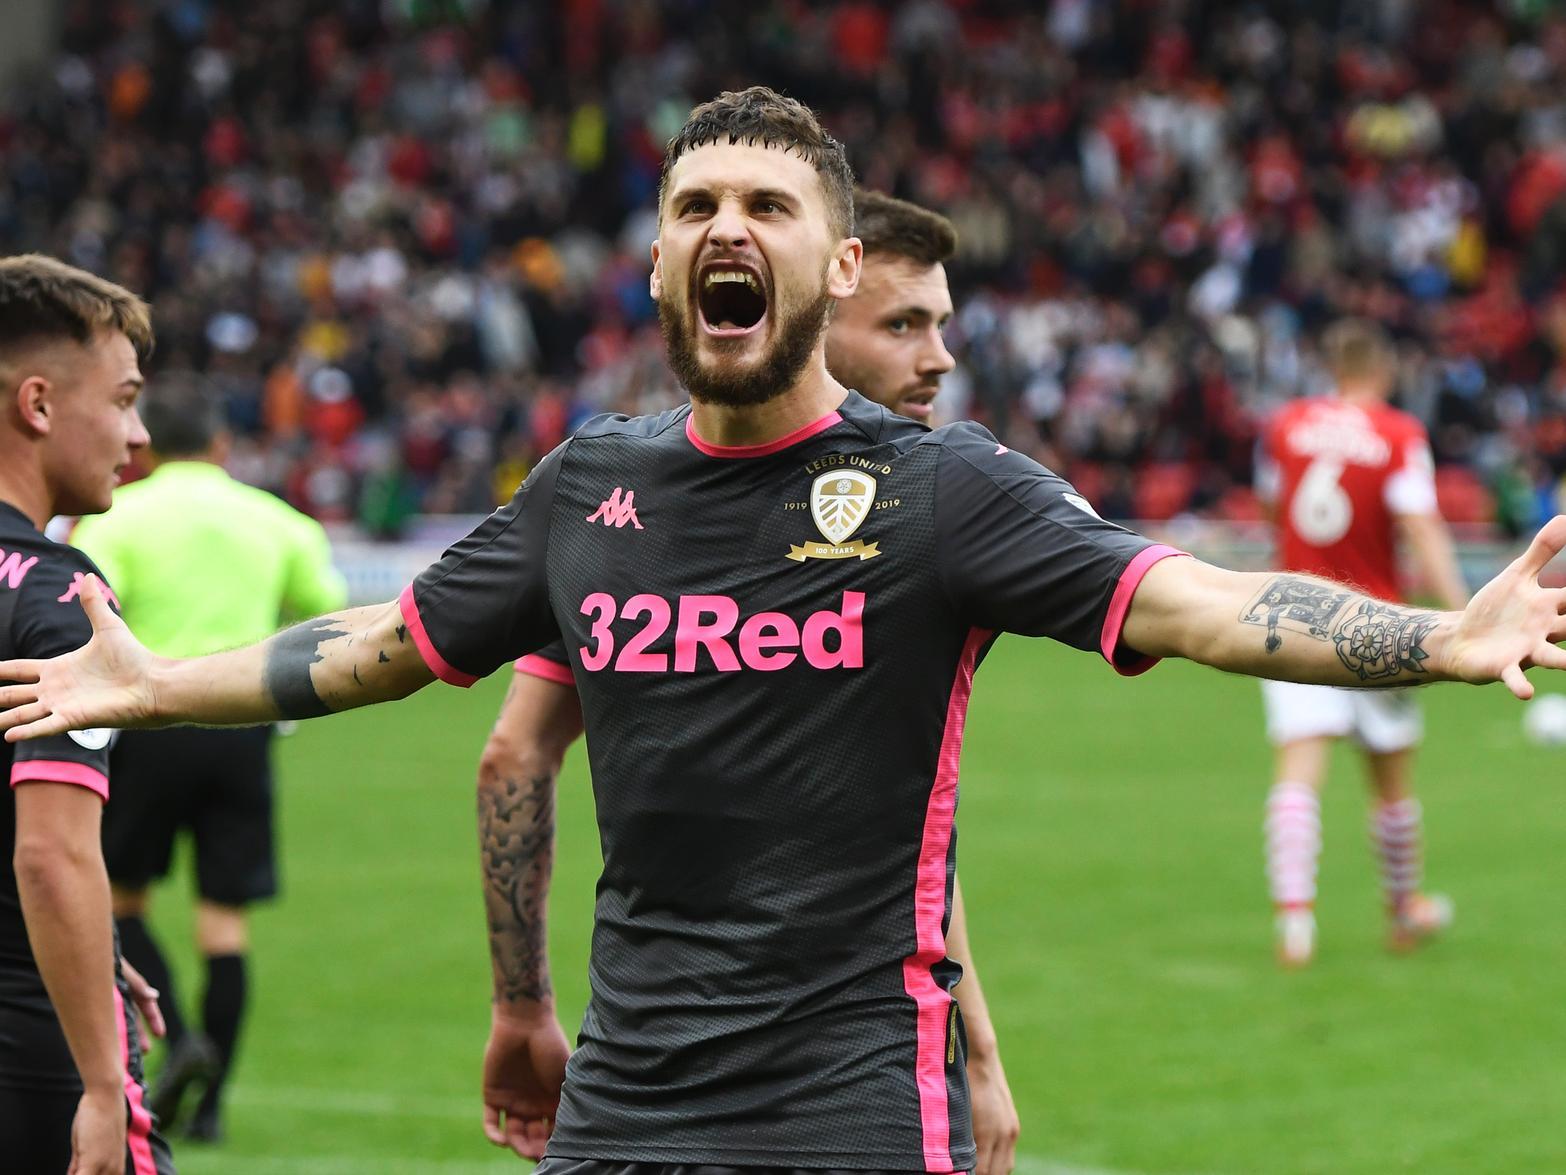 Leeds look to be moving closer to making their latest major contract announcement, with key midfielder Mateusz Klich understood to be on the verge of signing a new deal. (Football Insider)